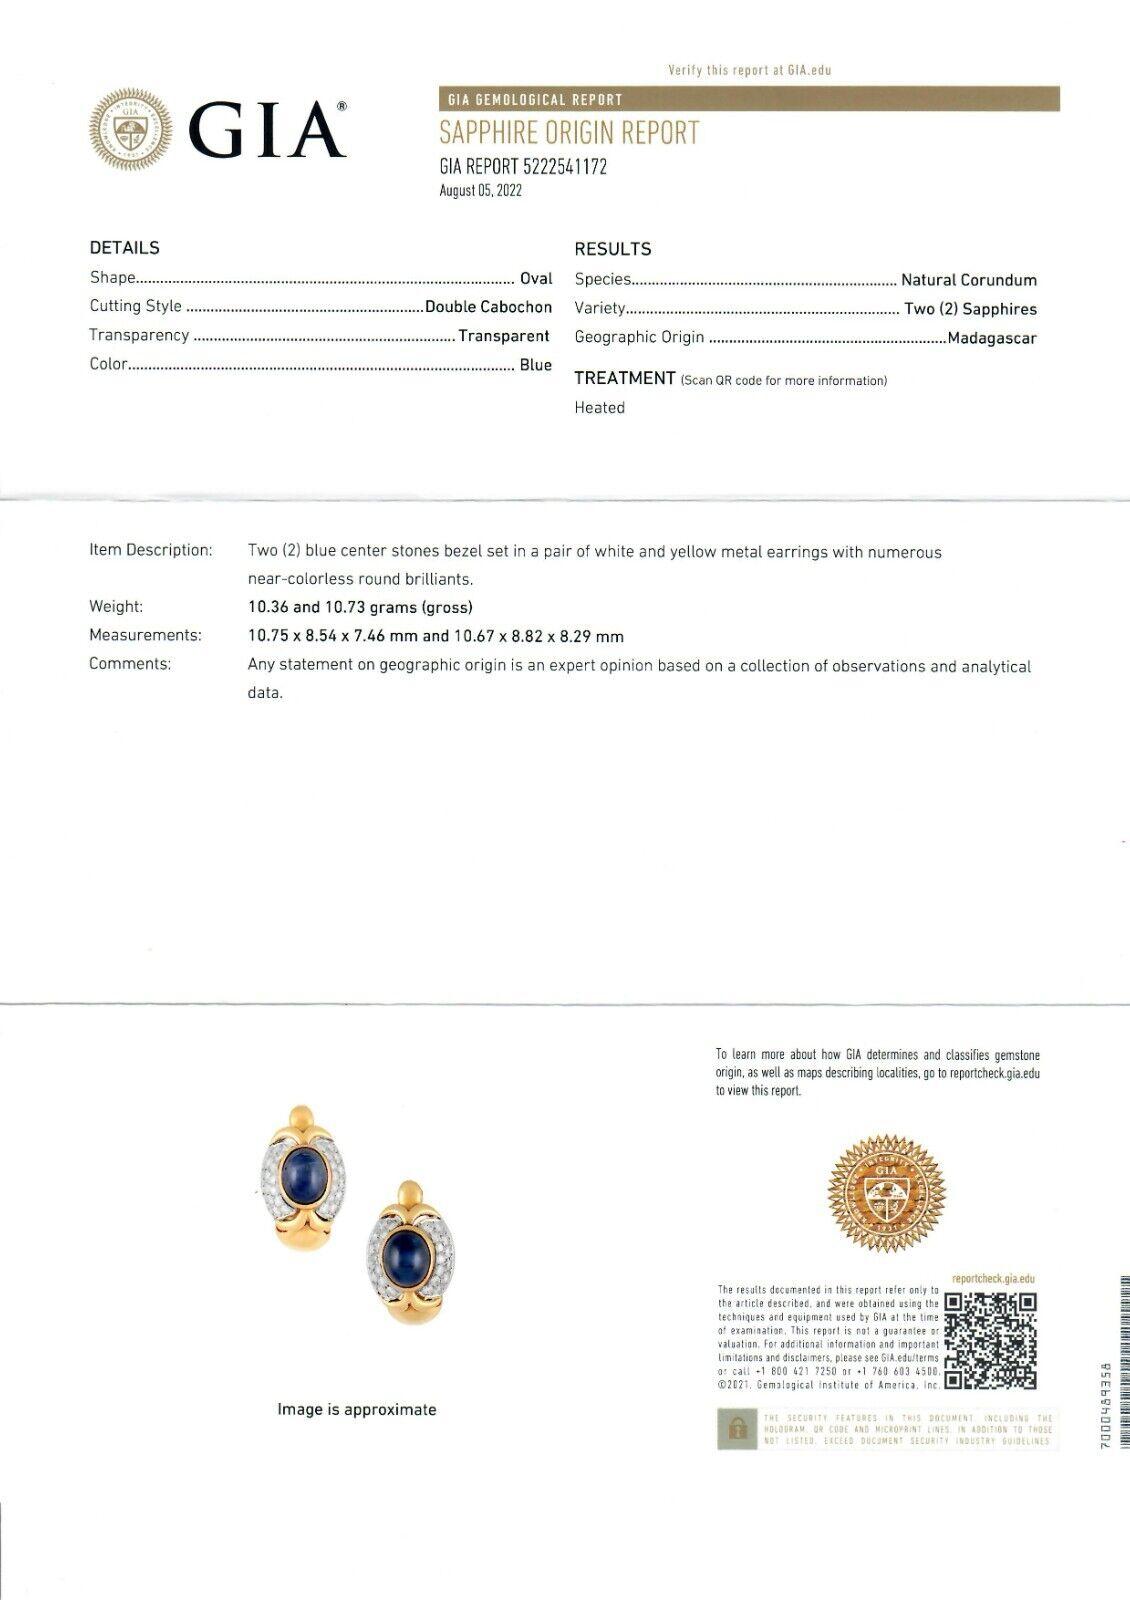 Large 18k Gold 18+ct GIA Oval Cabochon Sapphire Diamond Statement Cuff Earrings For Sale 2